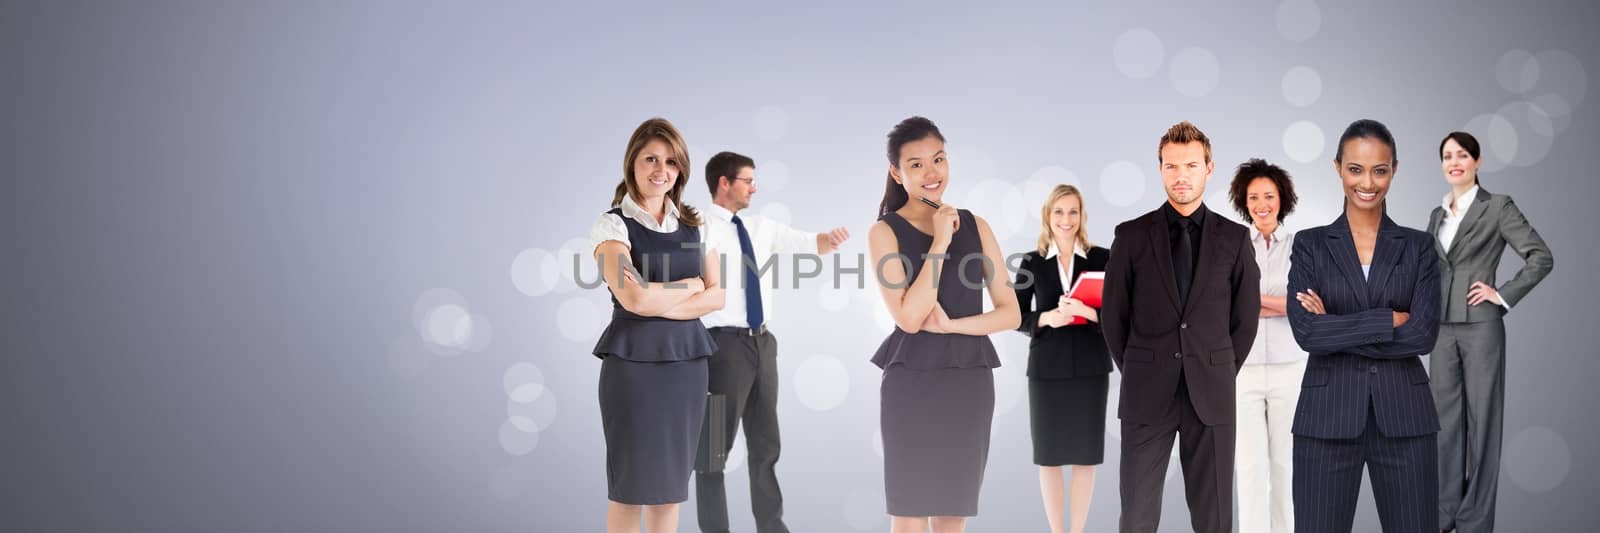 Digital composite of Business people with flare light source